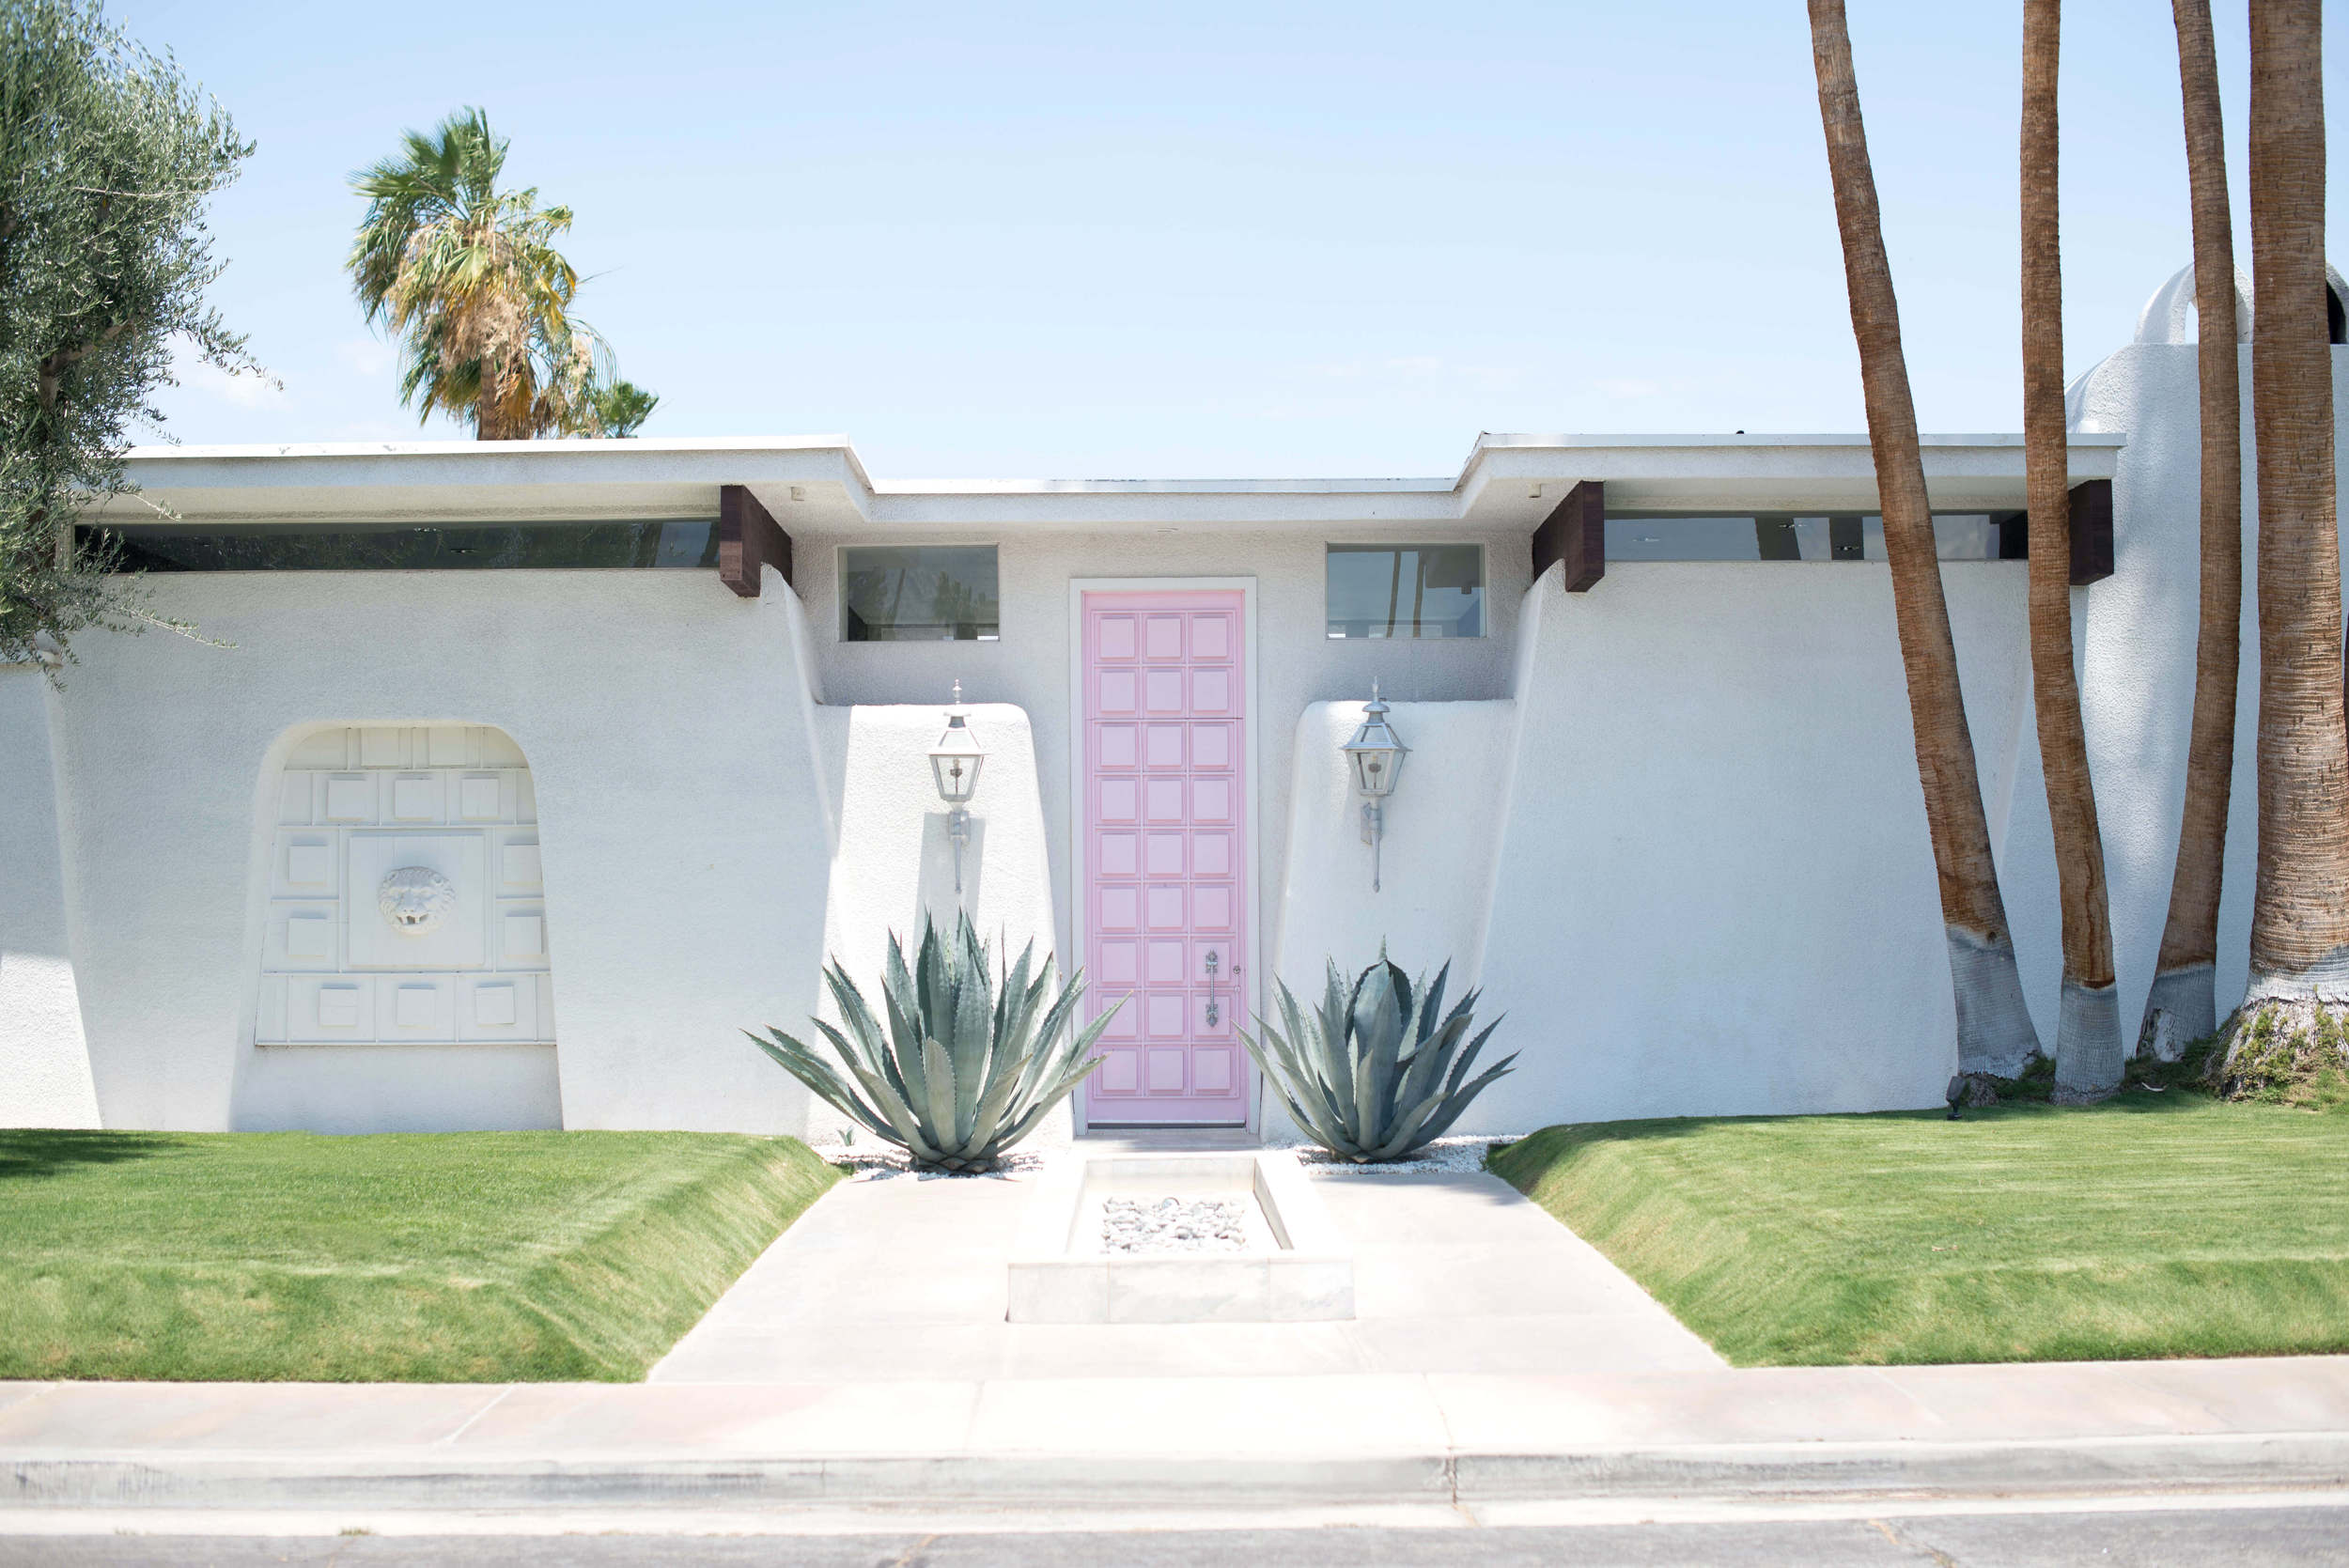 The famous Pink Door designed by Moises Esquenazi in Palm Springs